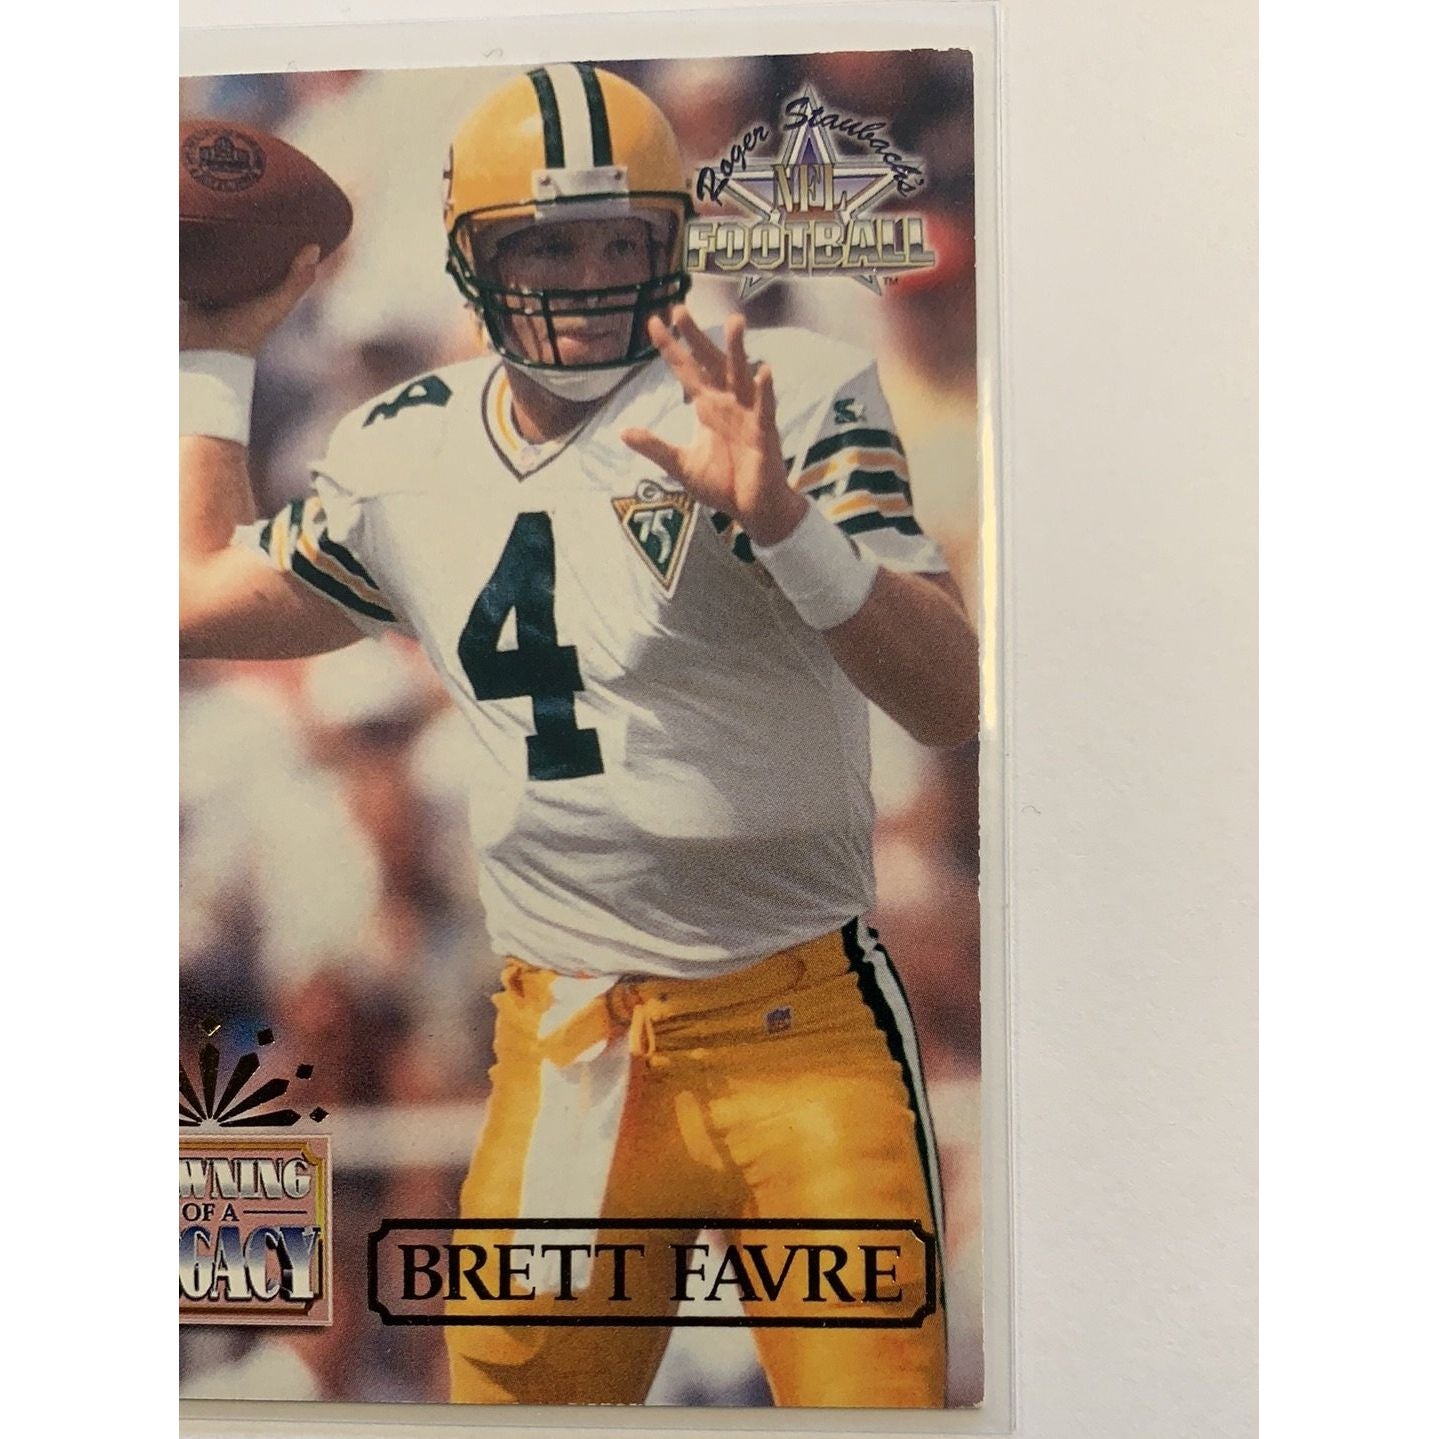  1994 Ted Williams Brett Favre Dawning of a Legacy  Local Legends Cards & Collectibles